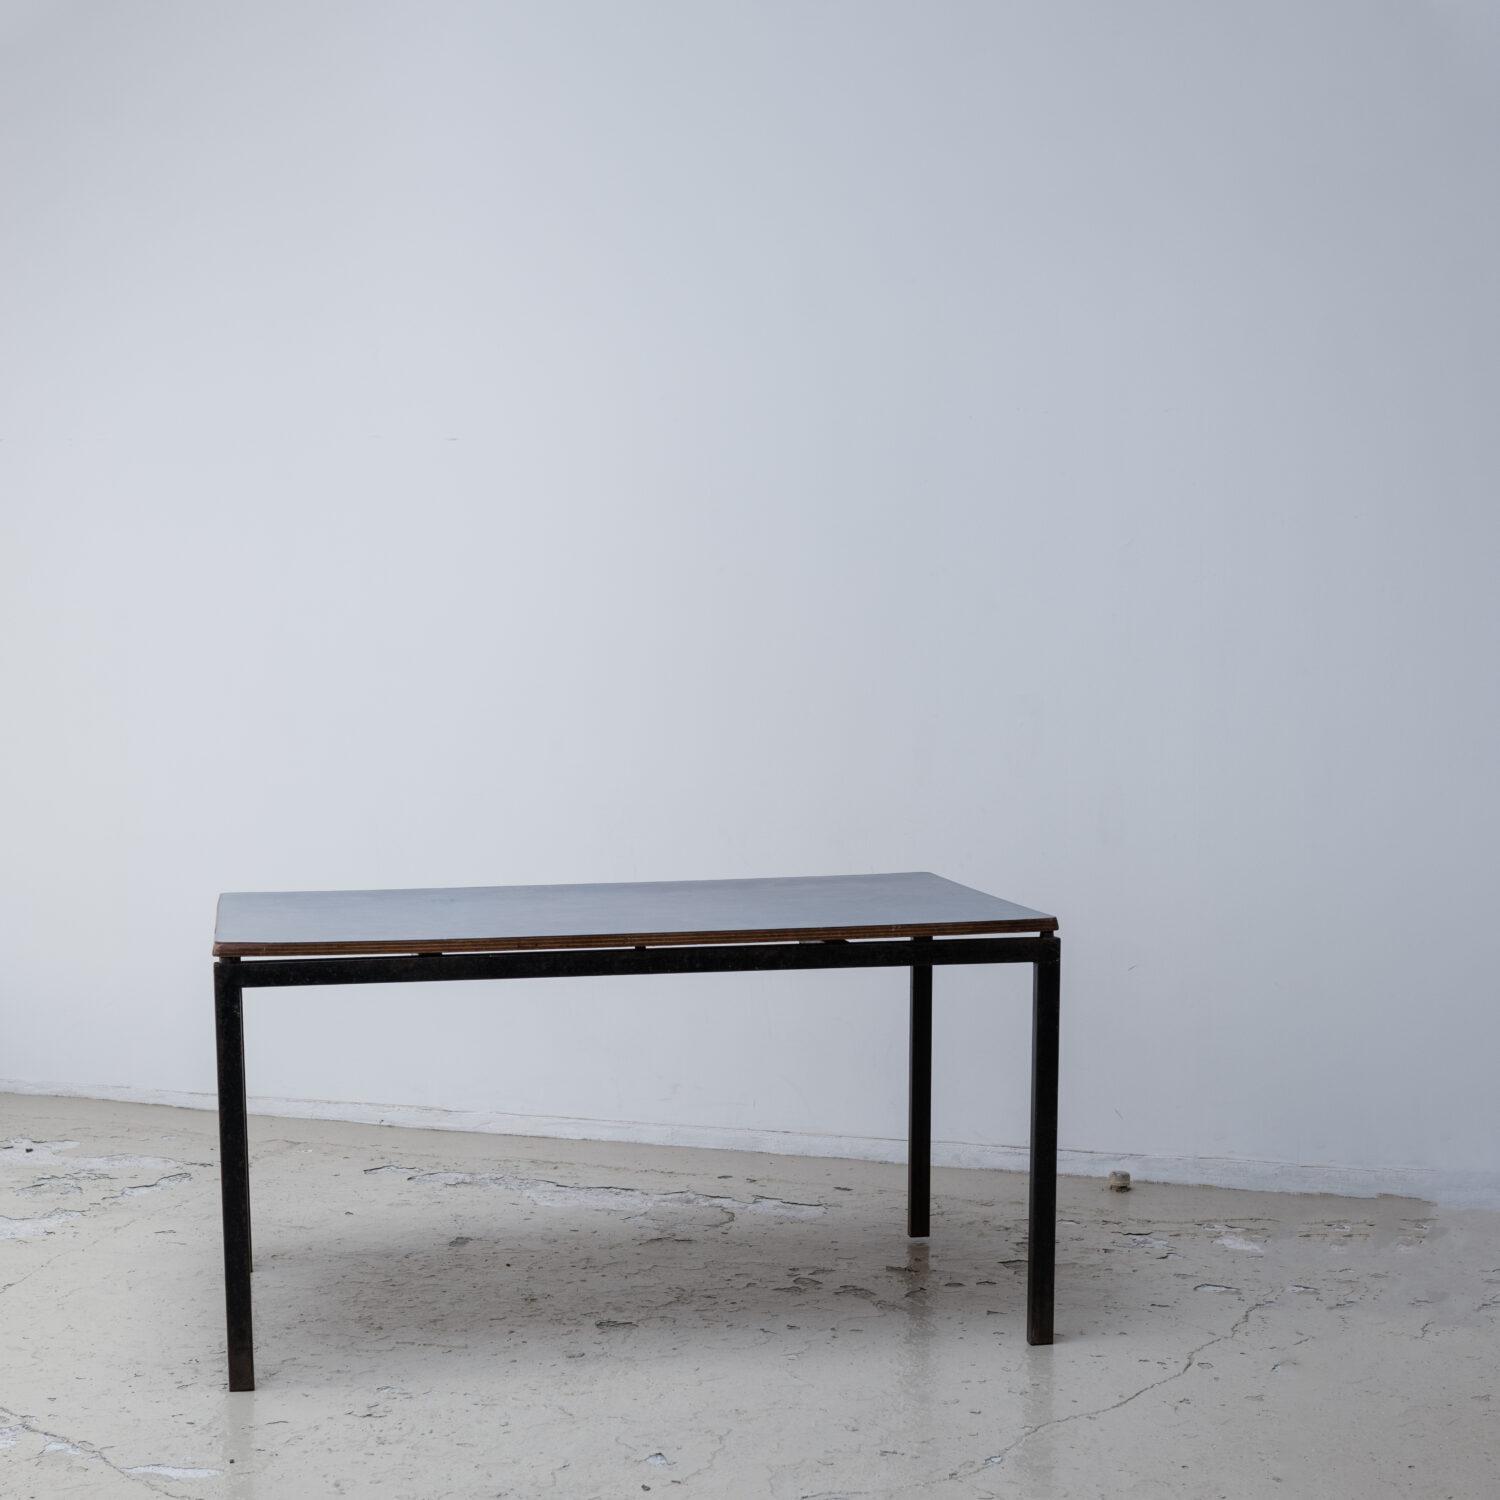 CHARLOTTE PERRIAND – Table, from Cité Cansado, Mauritania , 1958s